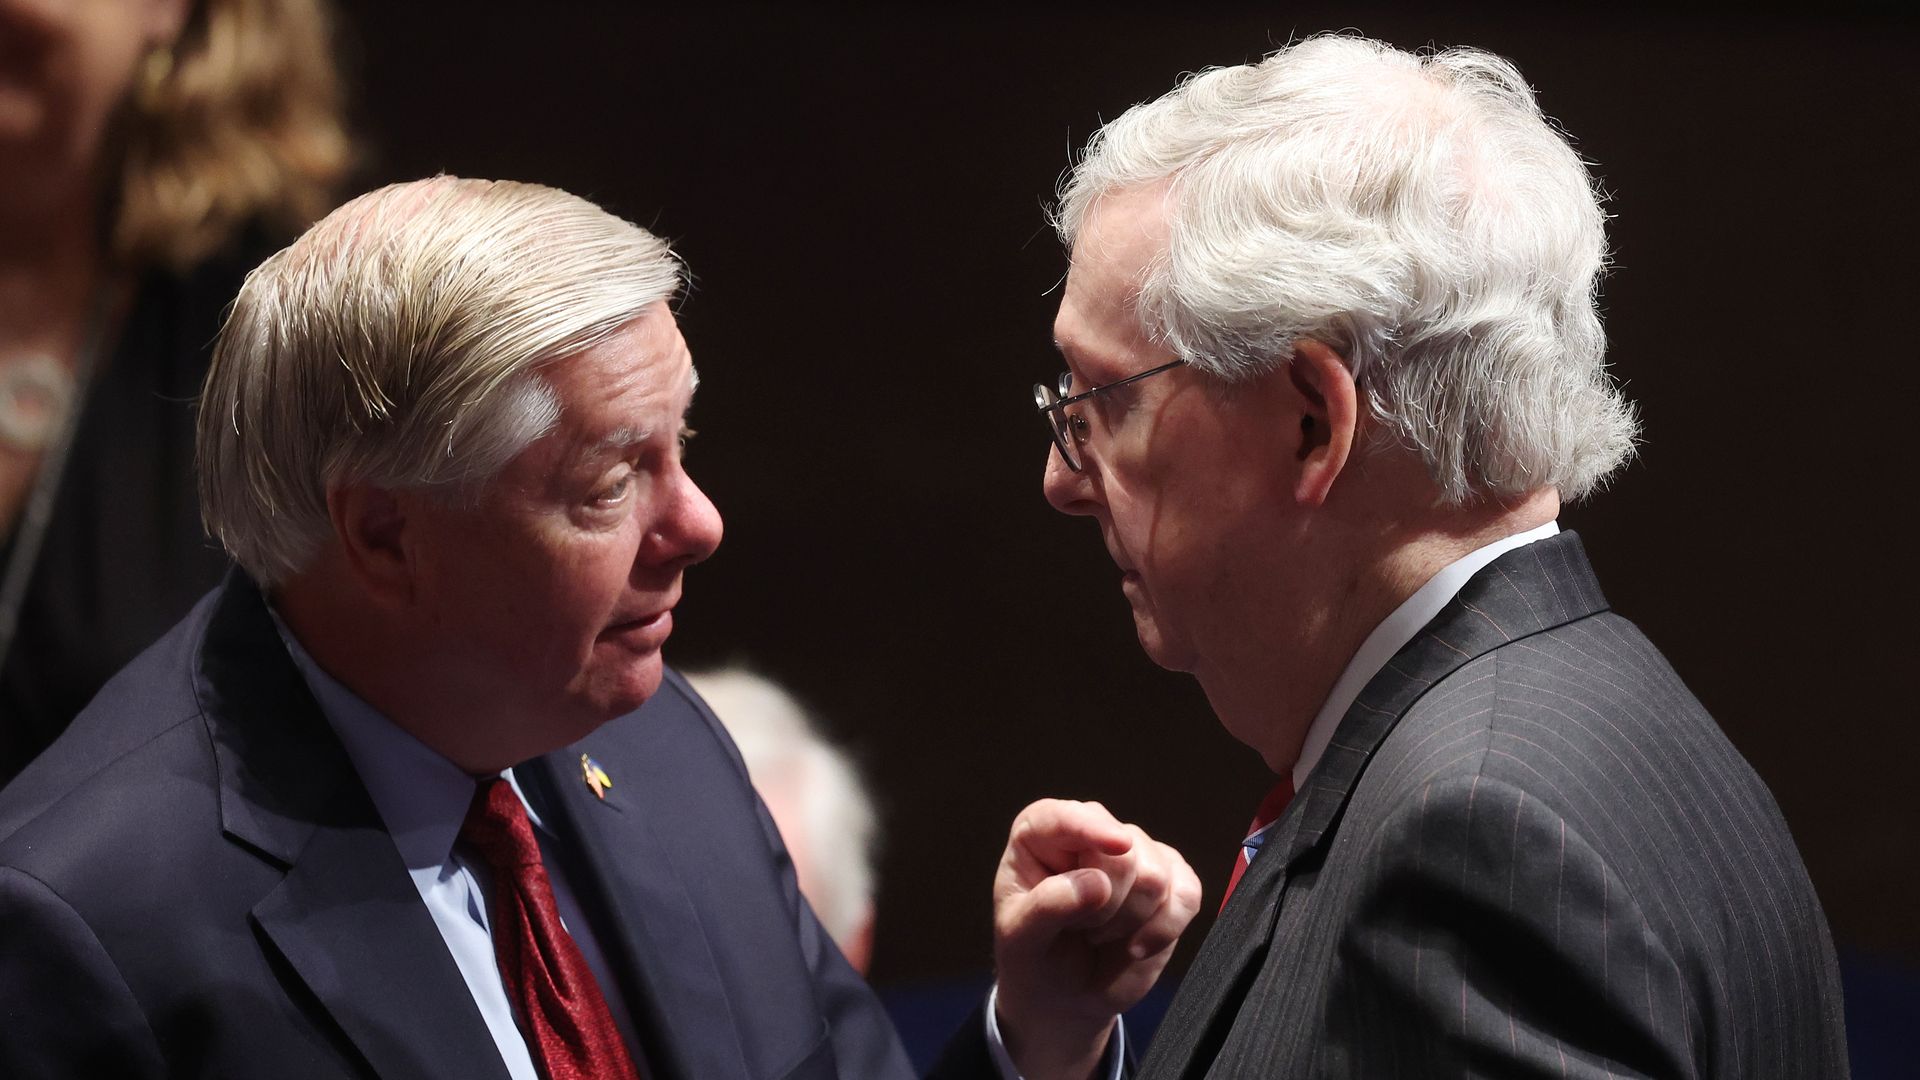 Sens. Lindsey Graham and Mitch McConnell have a conversation.